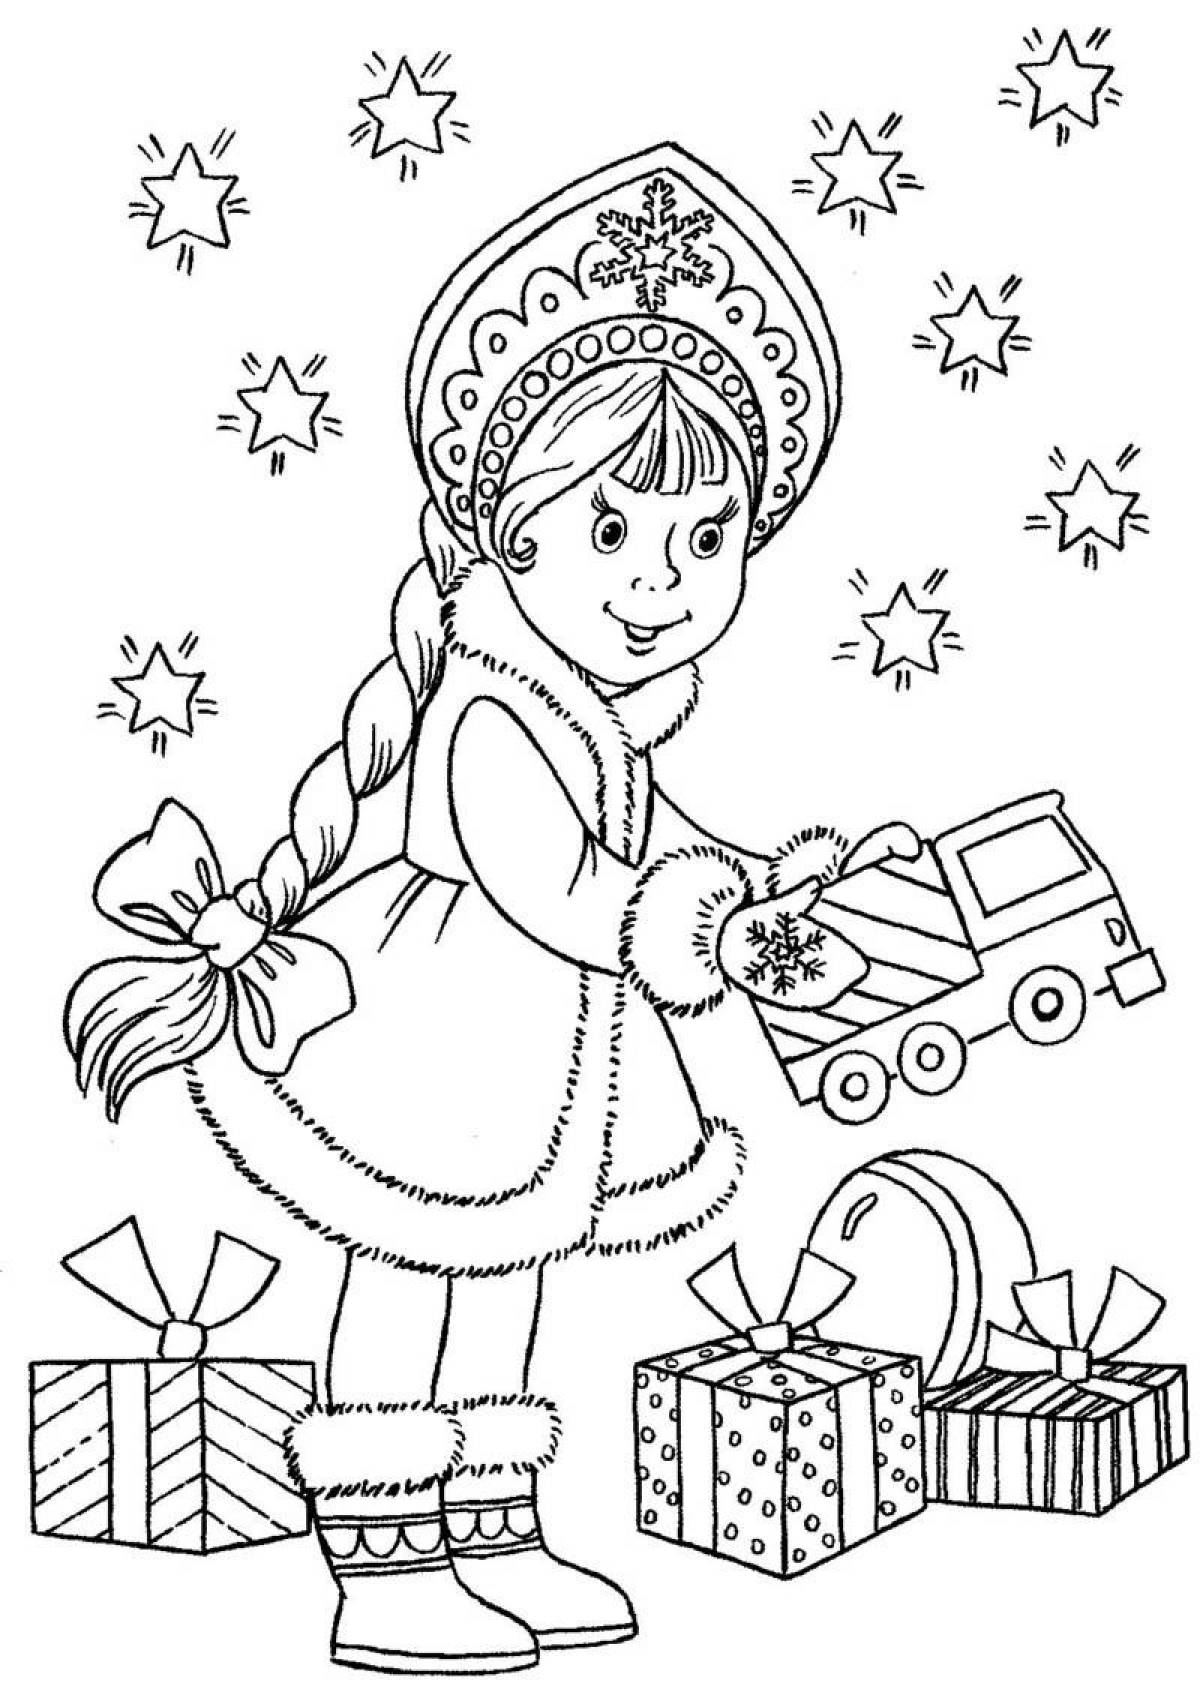 Amazing Snow Maiden coloring book for kids